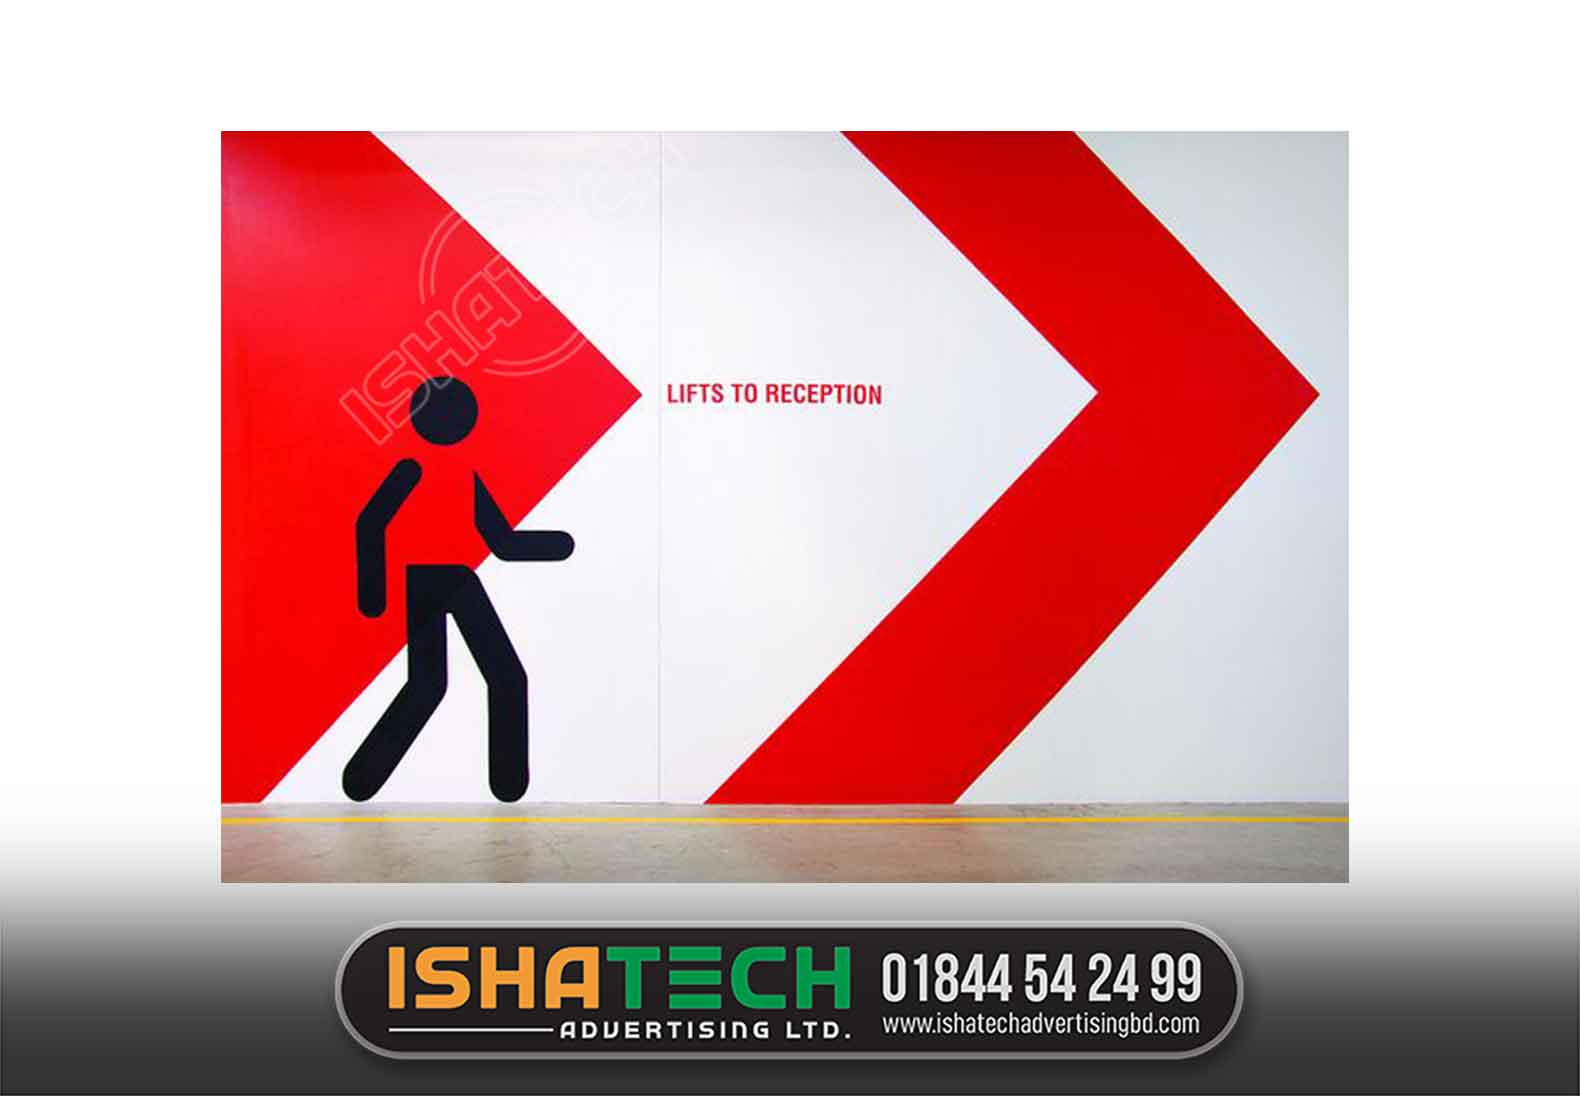 LIFTS TO RECEPTION DIRECTIONAL SIGNS